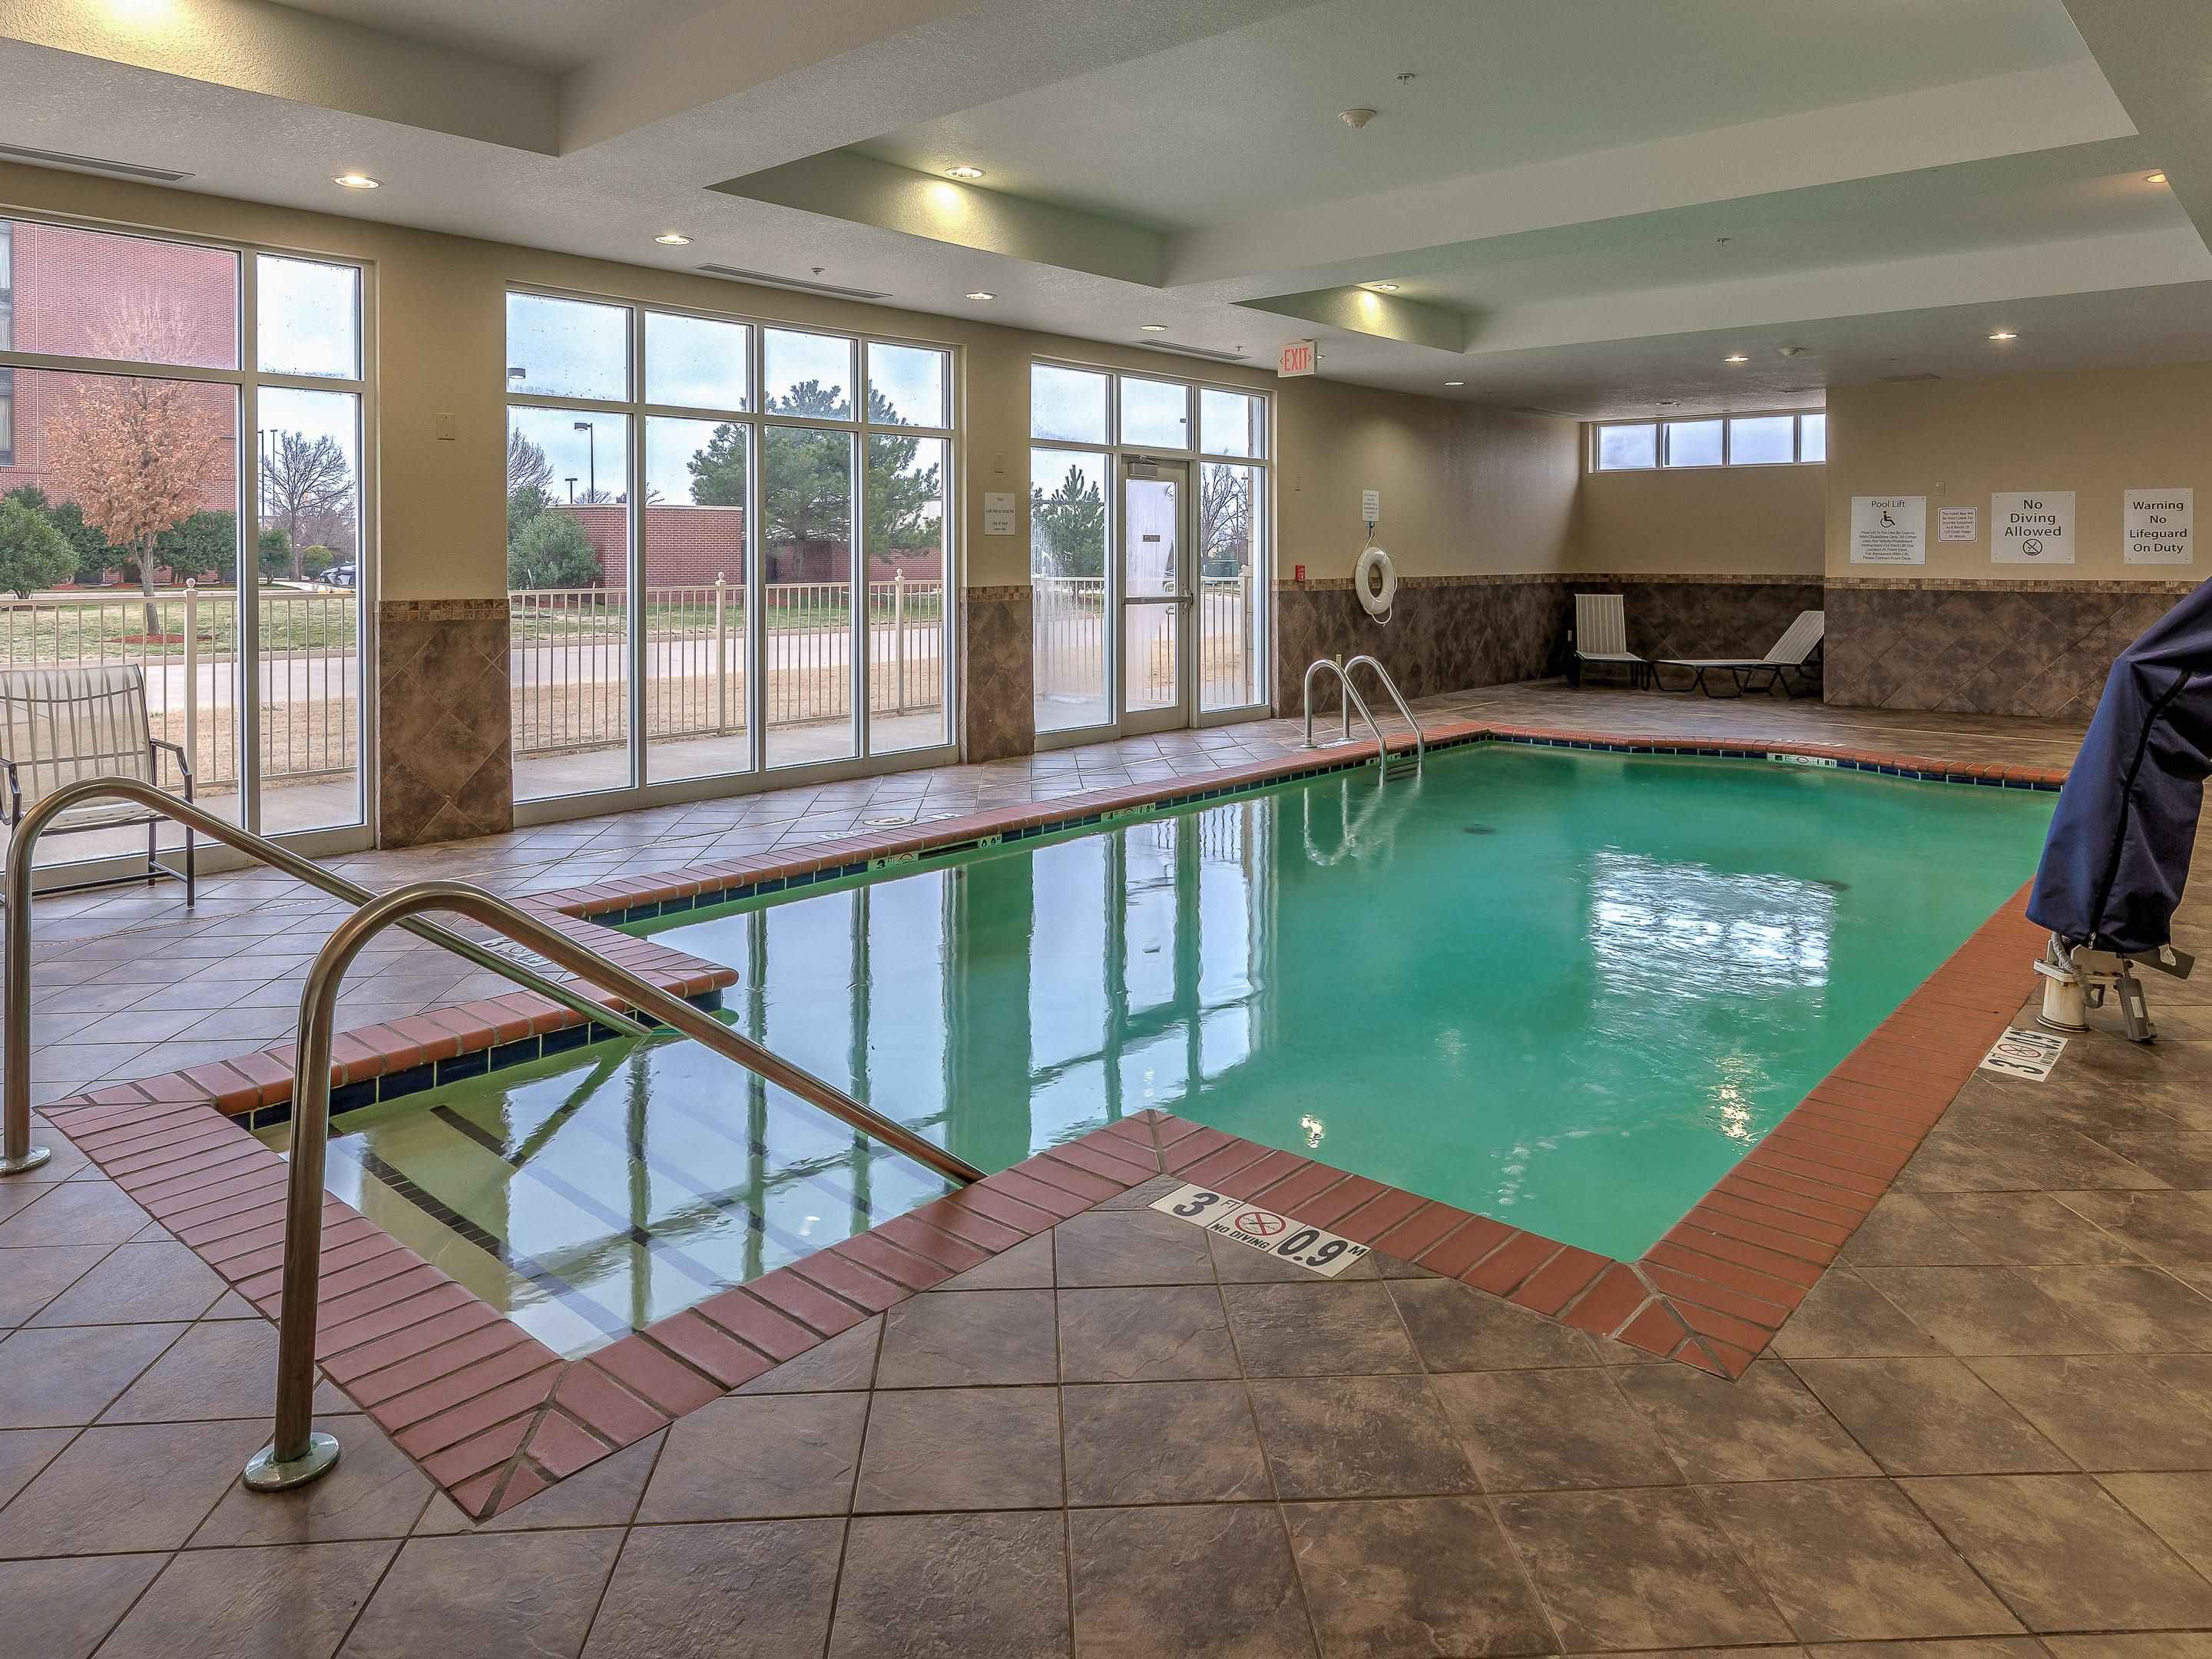 Get your workout in or unwind after a productive day in the OKC area with a dip in our indoor pool. We offer plenty of poolside seating and towels. Our fitness facilities also include a 24-hour gym with cardio machines and free weights. No matter how long you're staying with us, we make it easy to maintain your workout routine during travel.